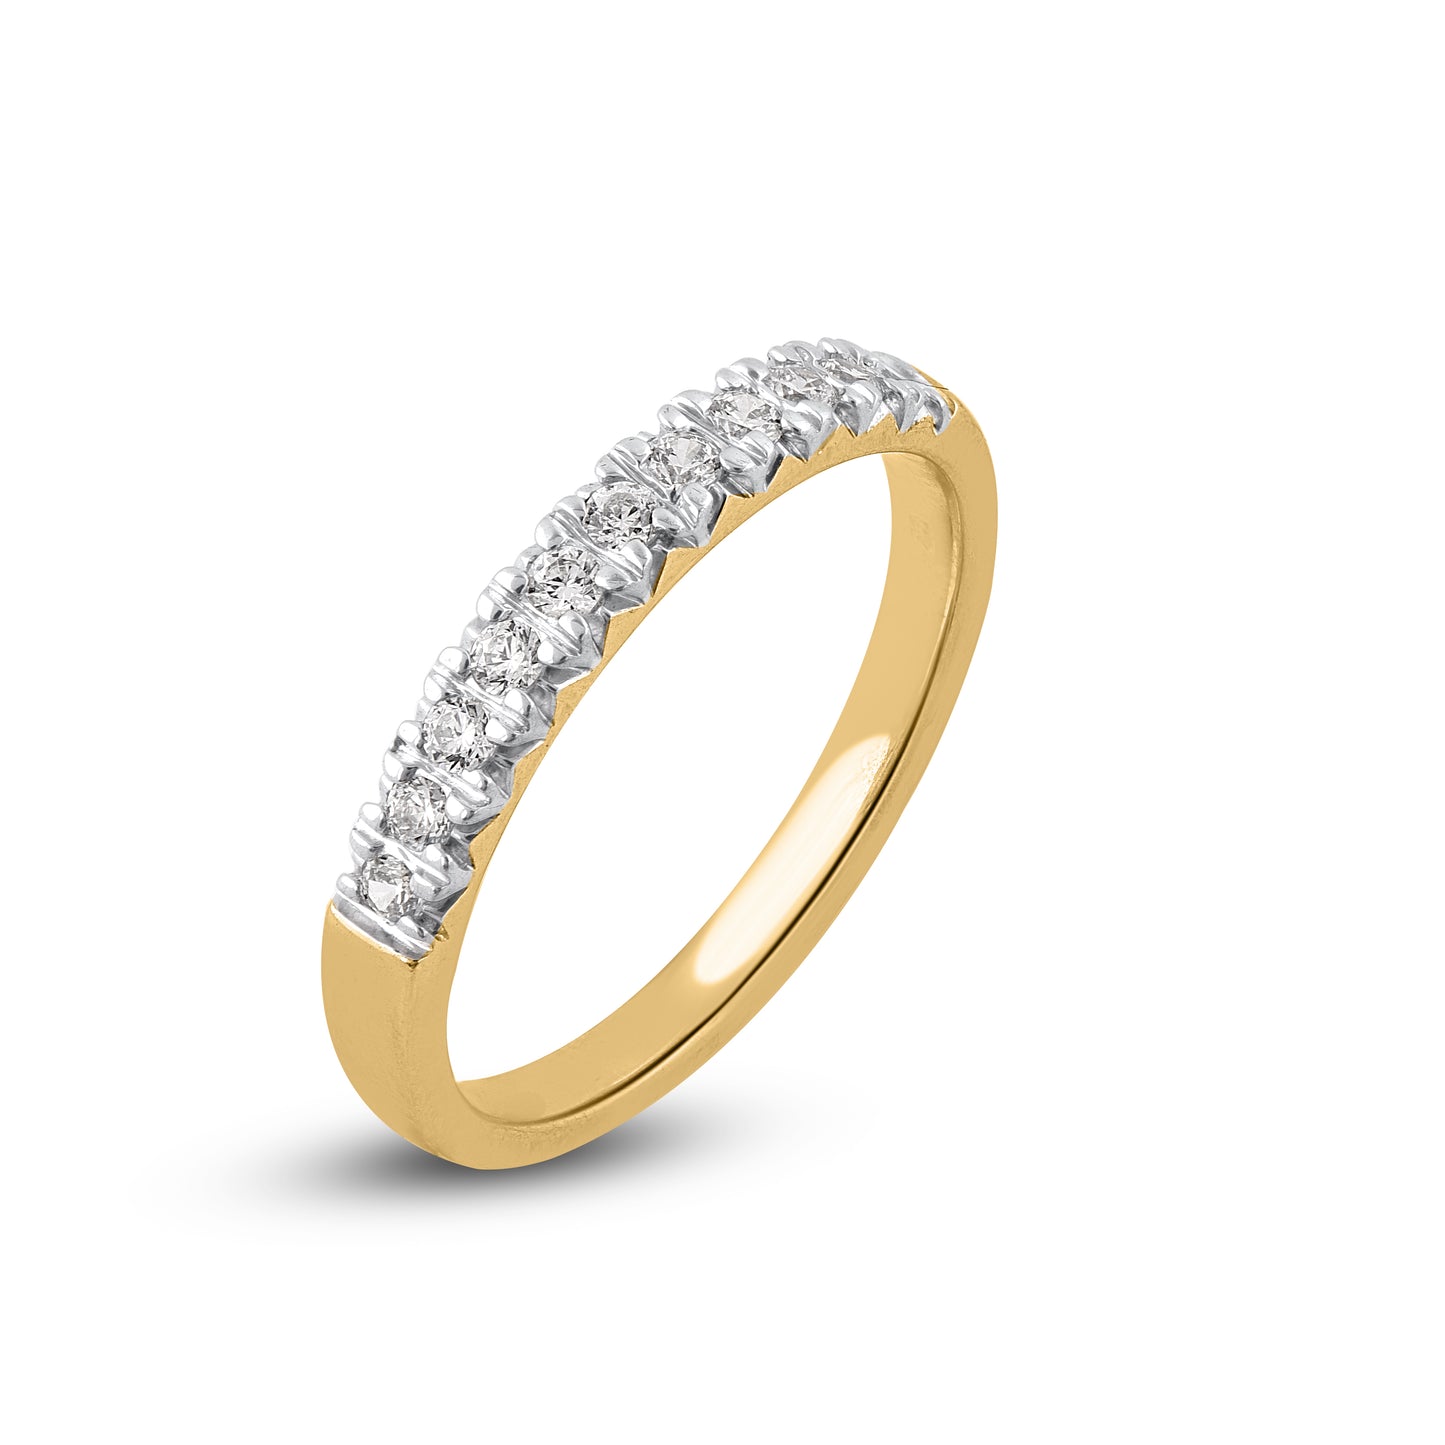 Half Eternity Band Ring in 10K Gold